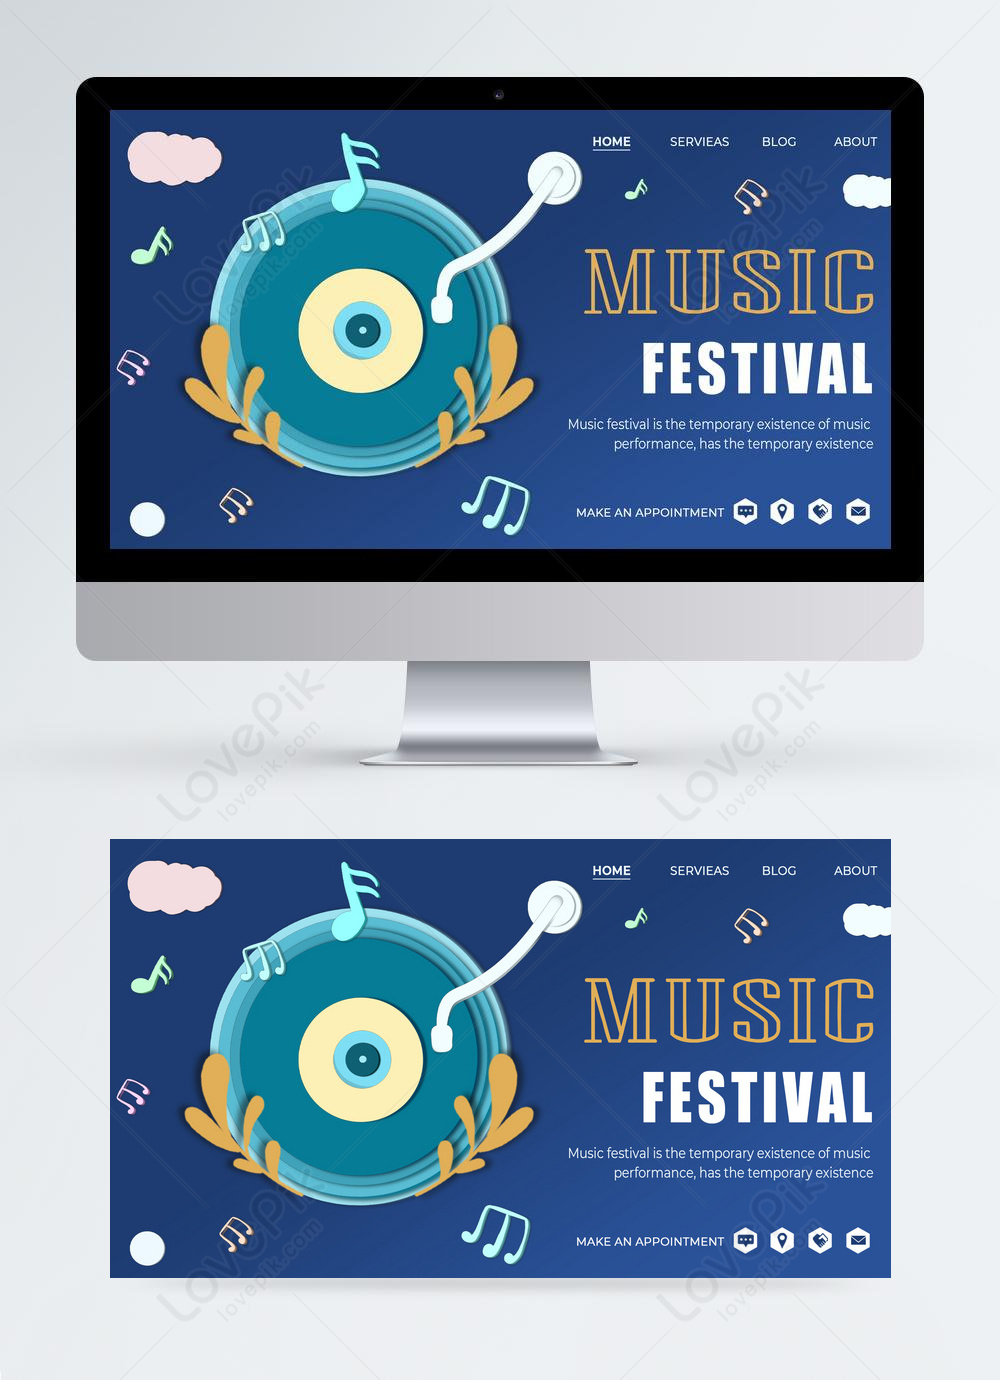 Free PSD, Anime-comic style music festival flyer template